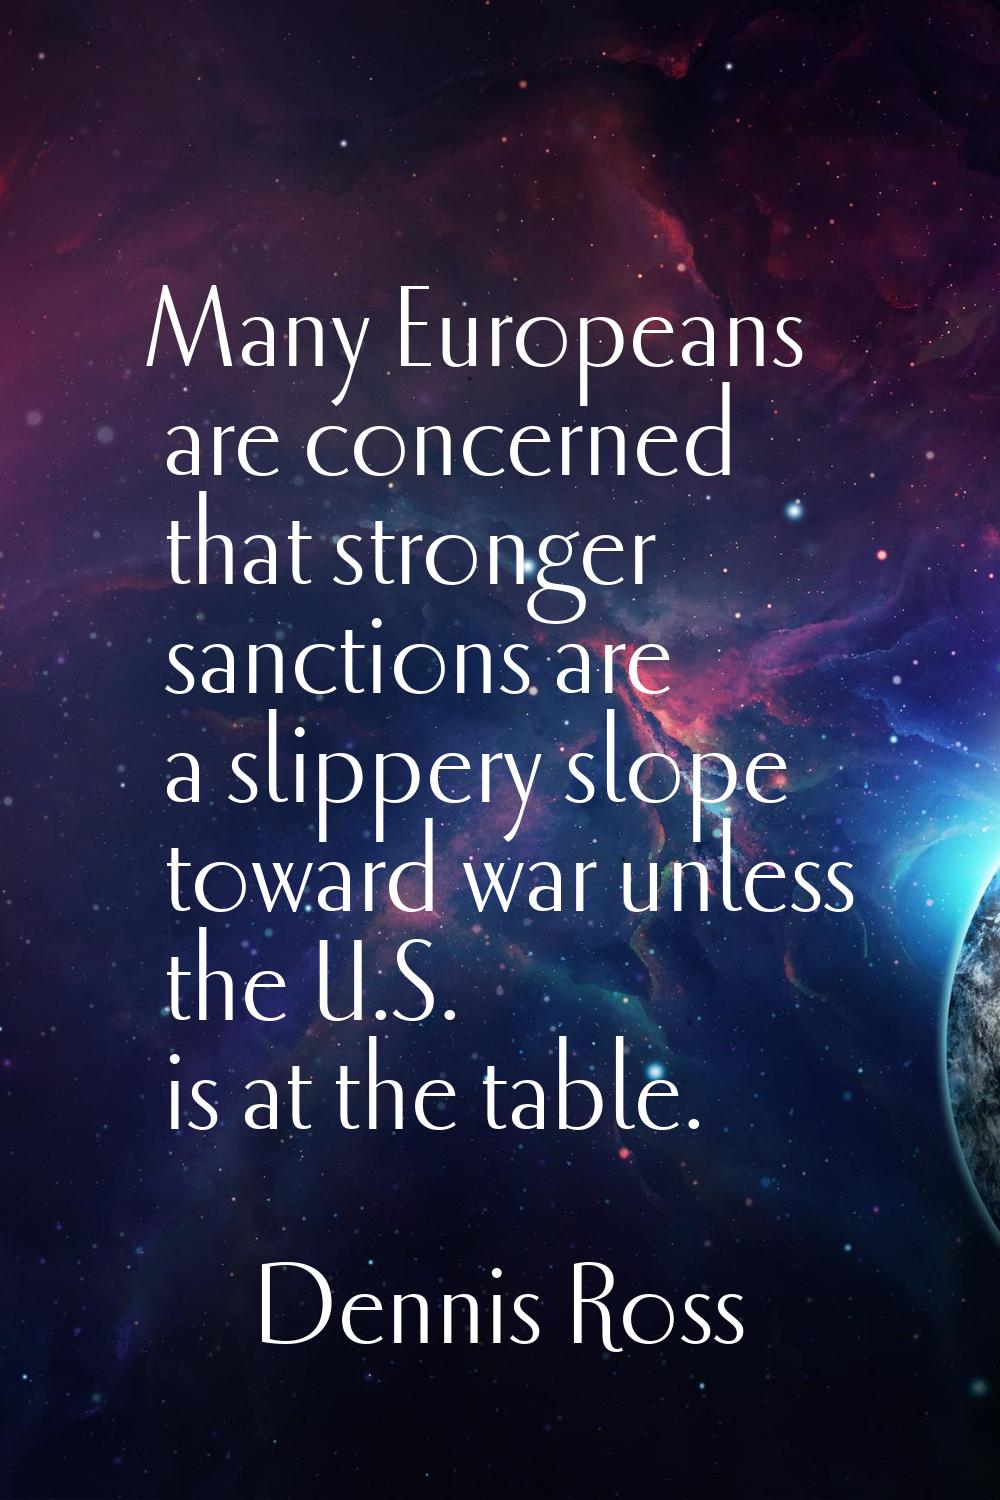 Many Europeans are concerned that stronger sanctions are a slippery slope toward war unless the U.S